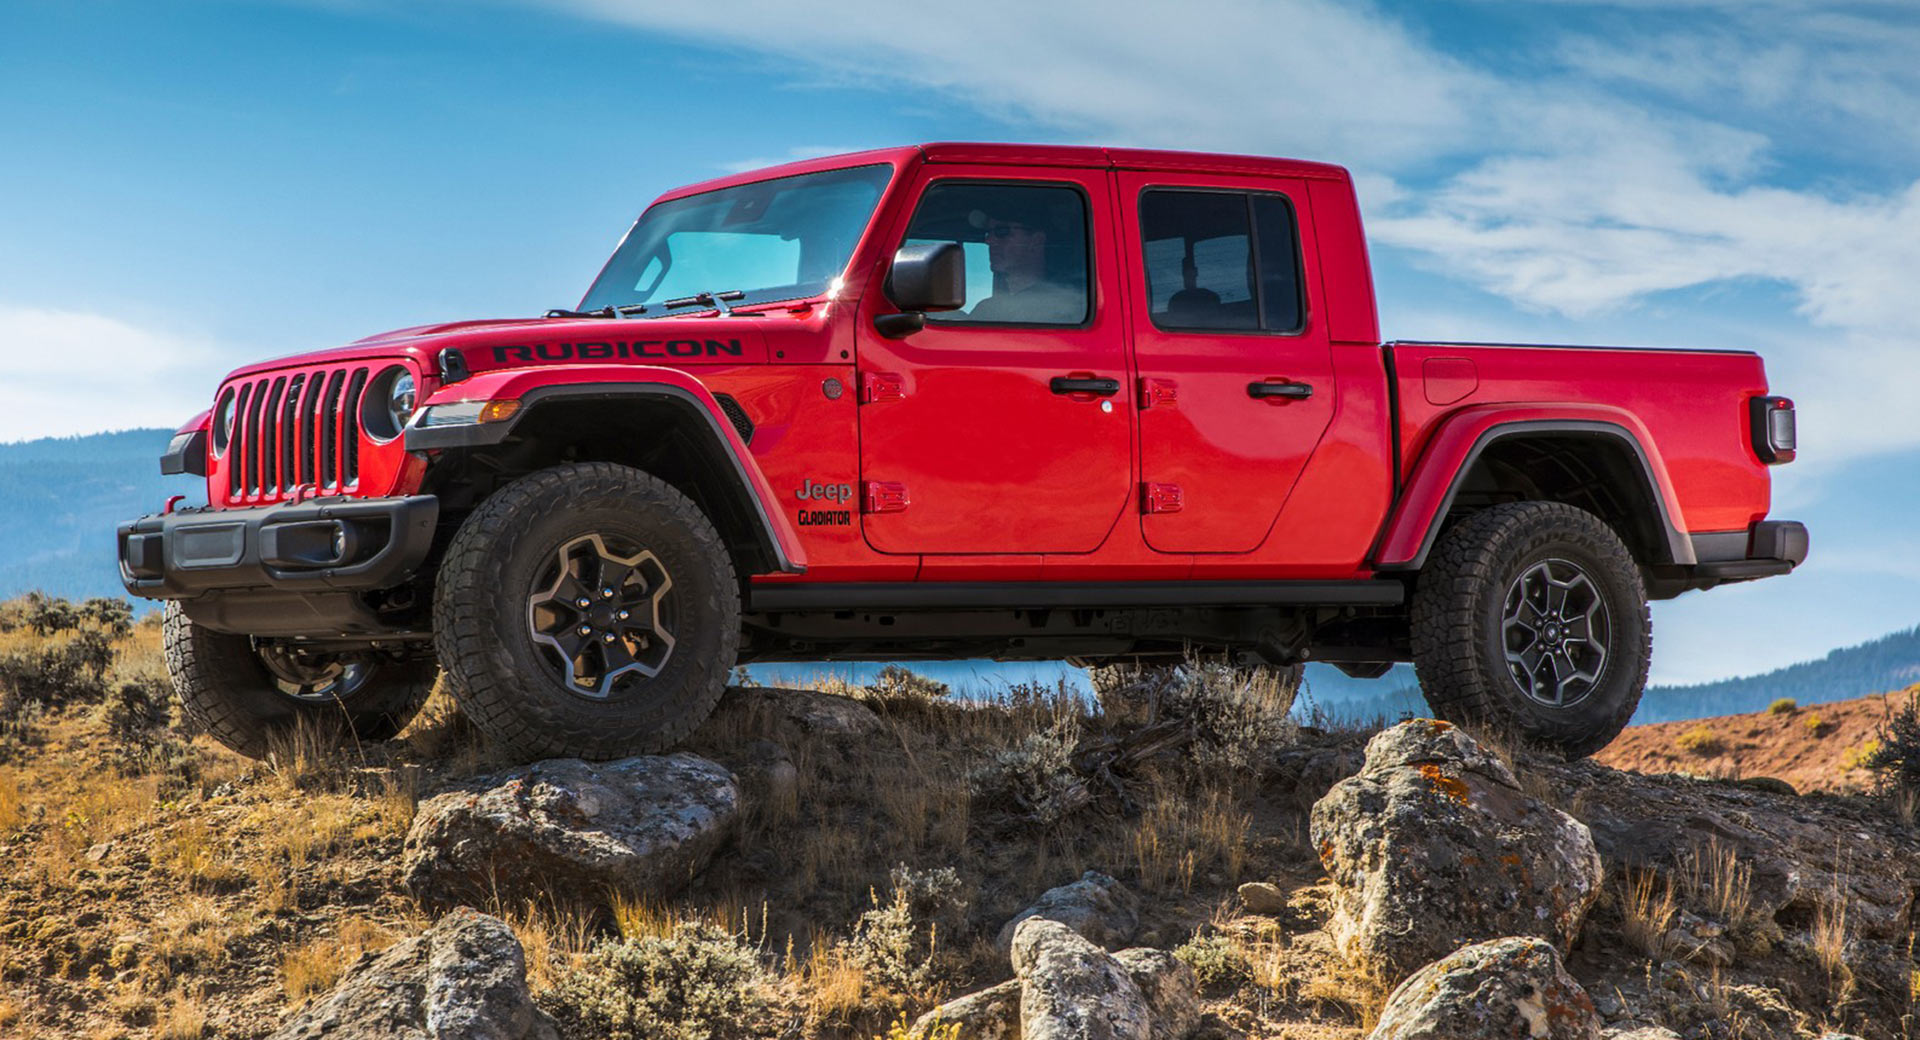 2021 Jeep Gladiator EcoDiesel Rated At 24 MPG Combined | Carscoops